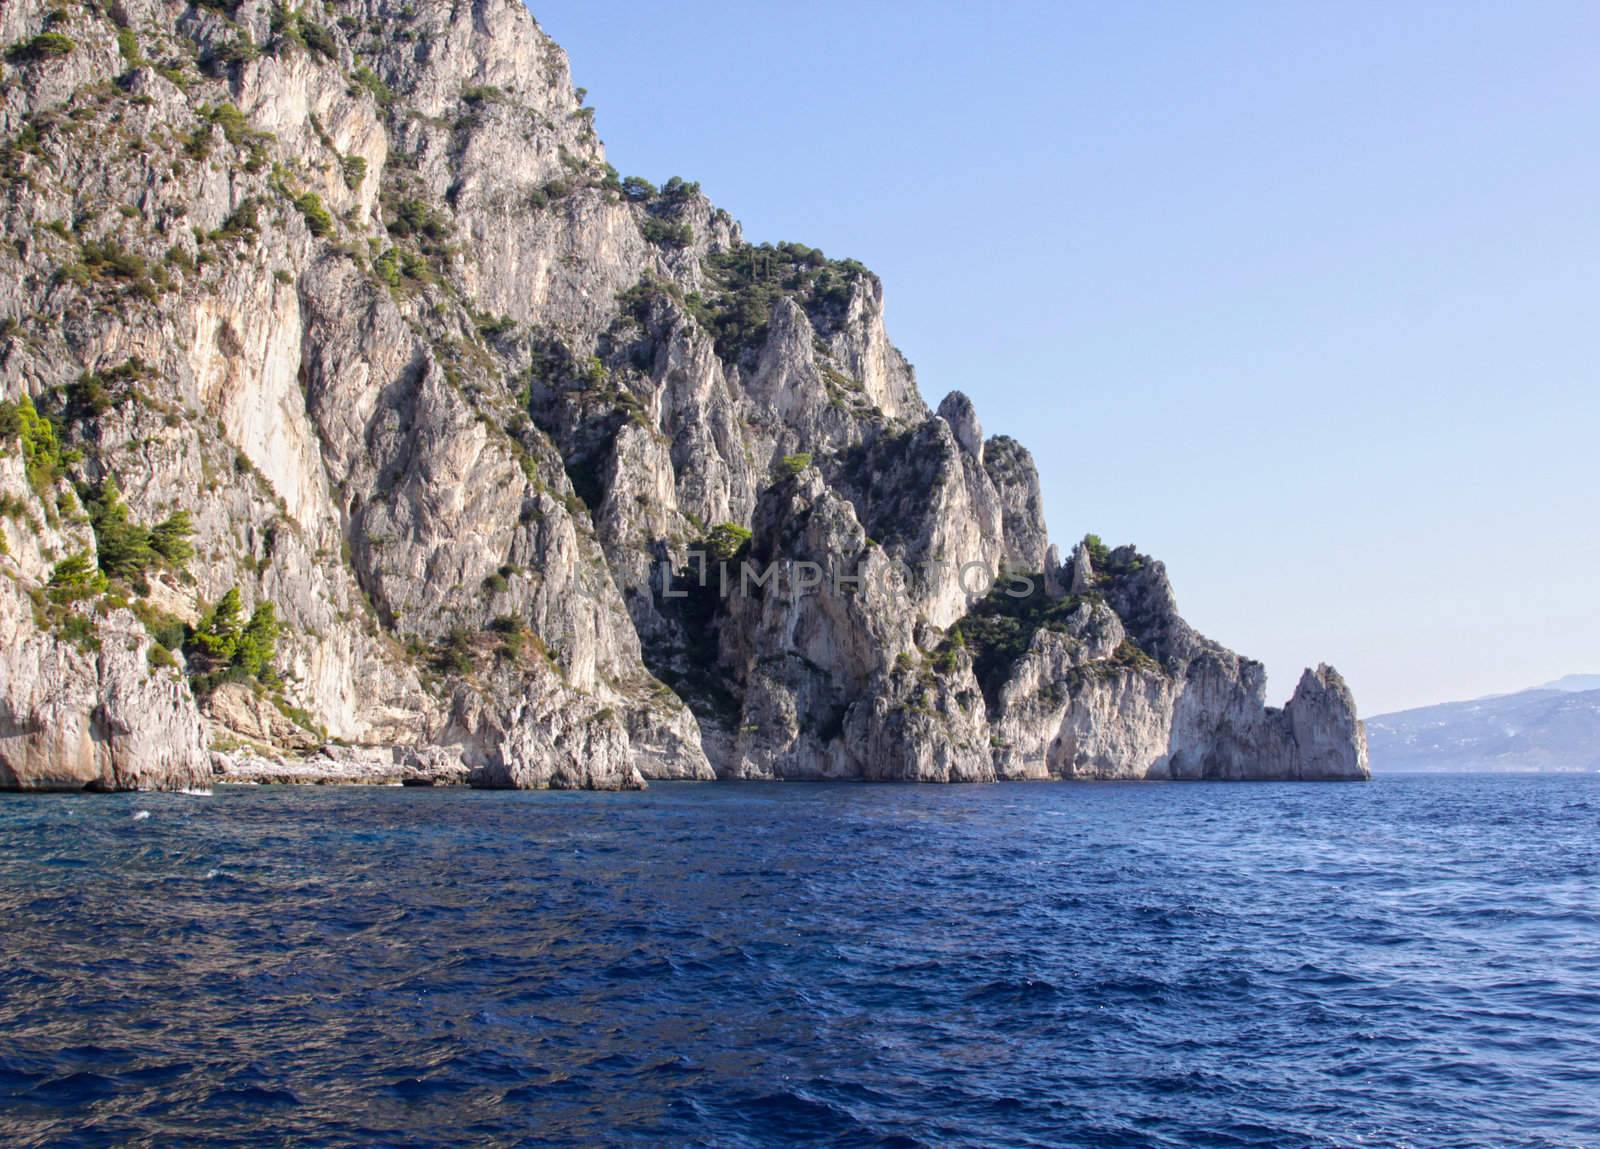 A cliff wall on the island of Capri, which is off Sorrentine peninsula in the Bay of Naples, Italy.